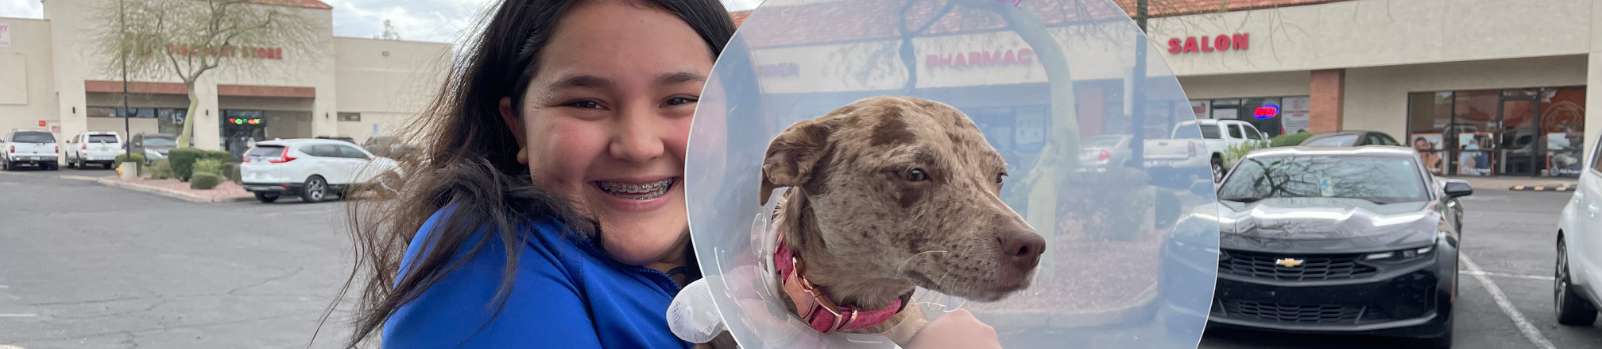 Young woman smiling holding her dog wearing a surgical cone